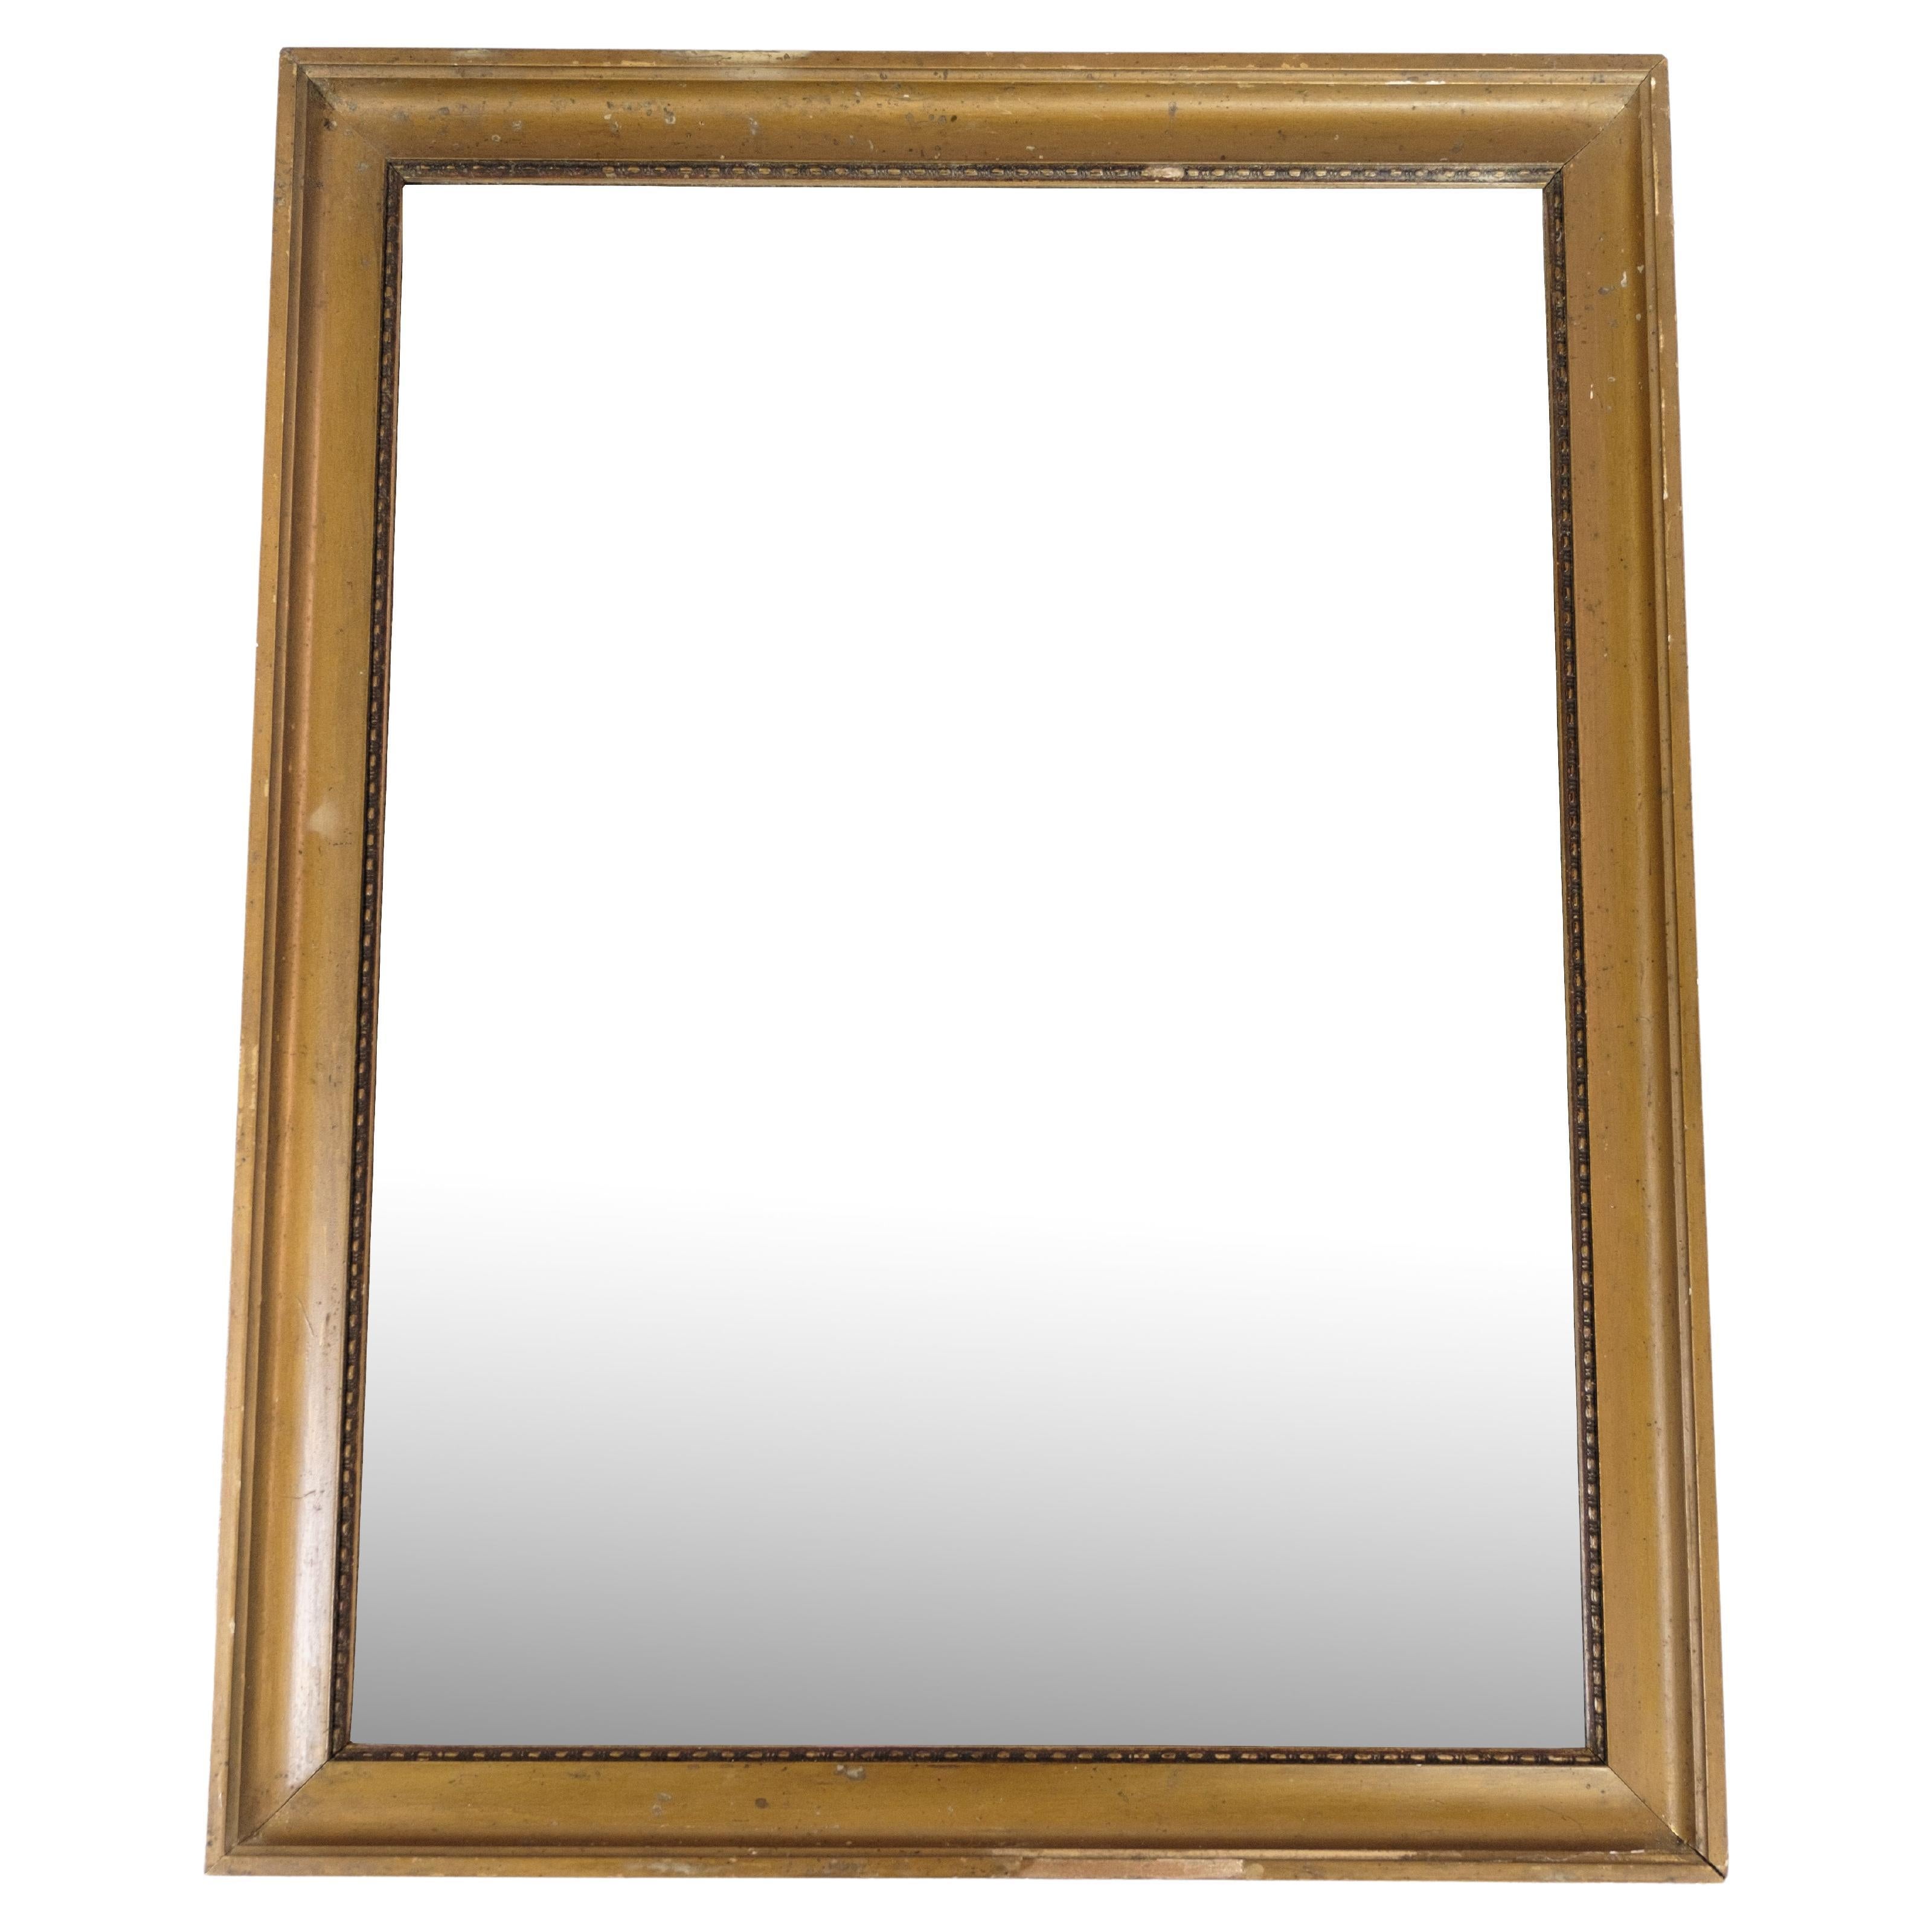 Antique mirror with a gilded frame from around the 1930s.
Dimensions in cm: H:57 W:44

This product will be inspected thoroughly at our professional workshop by our educated employees, who assure the product quality